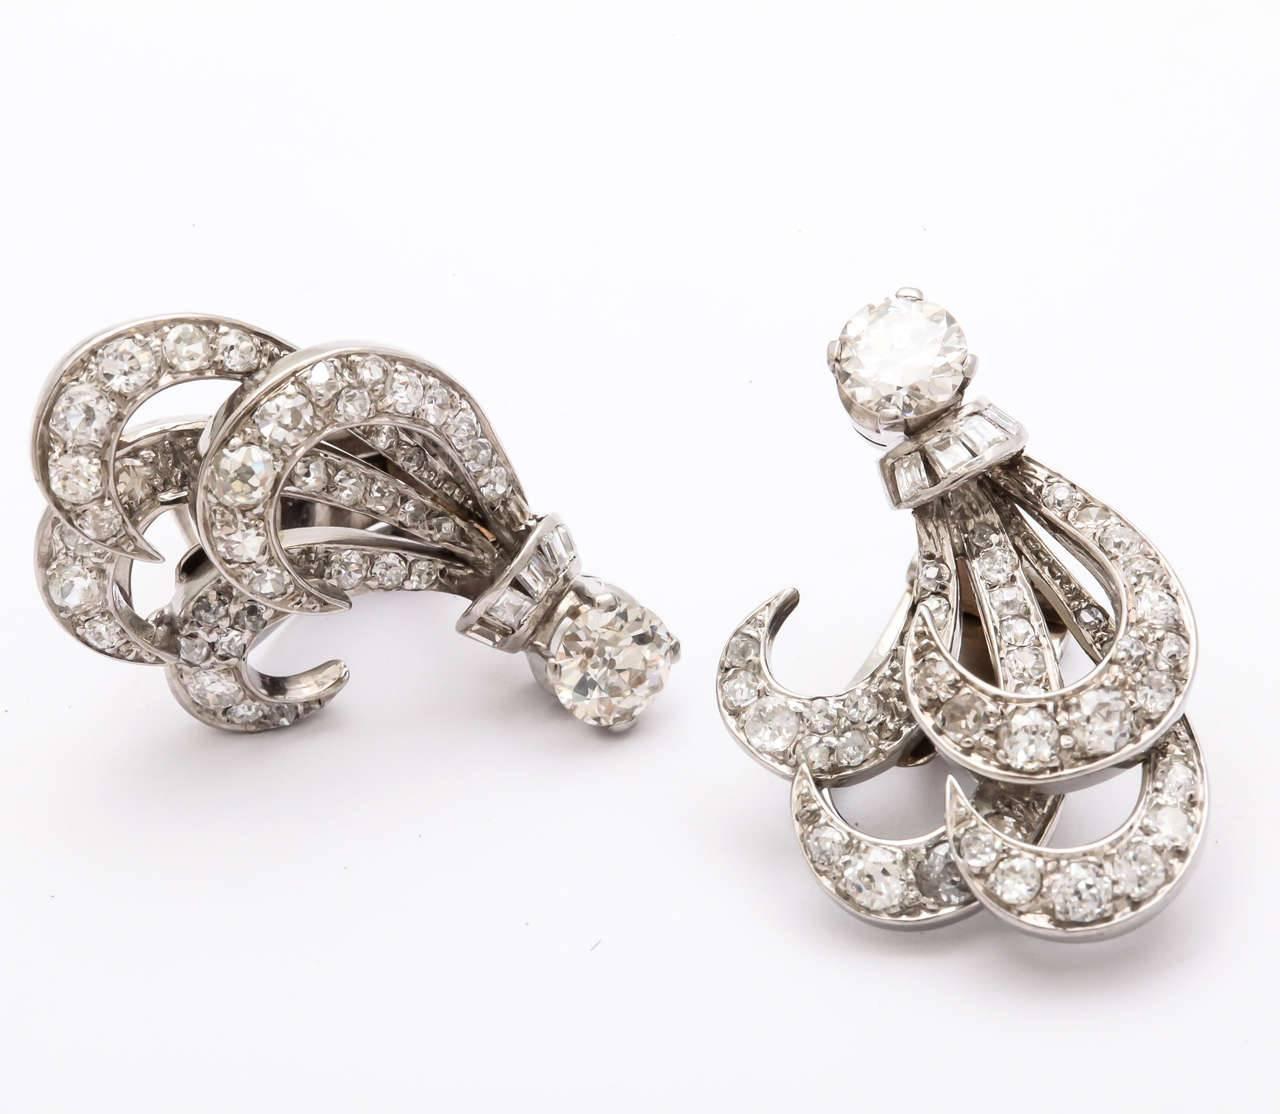 A pair of stunning retro diamond feather form clip earrings set in platinum.
The diamonds are fine quality.  The two larger european cut diamonds weigh 1.20 and the total weight  of the earrings is approximately 3cts.

A UGL appraisal is